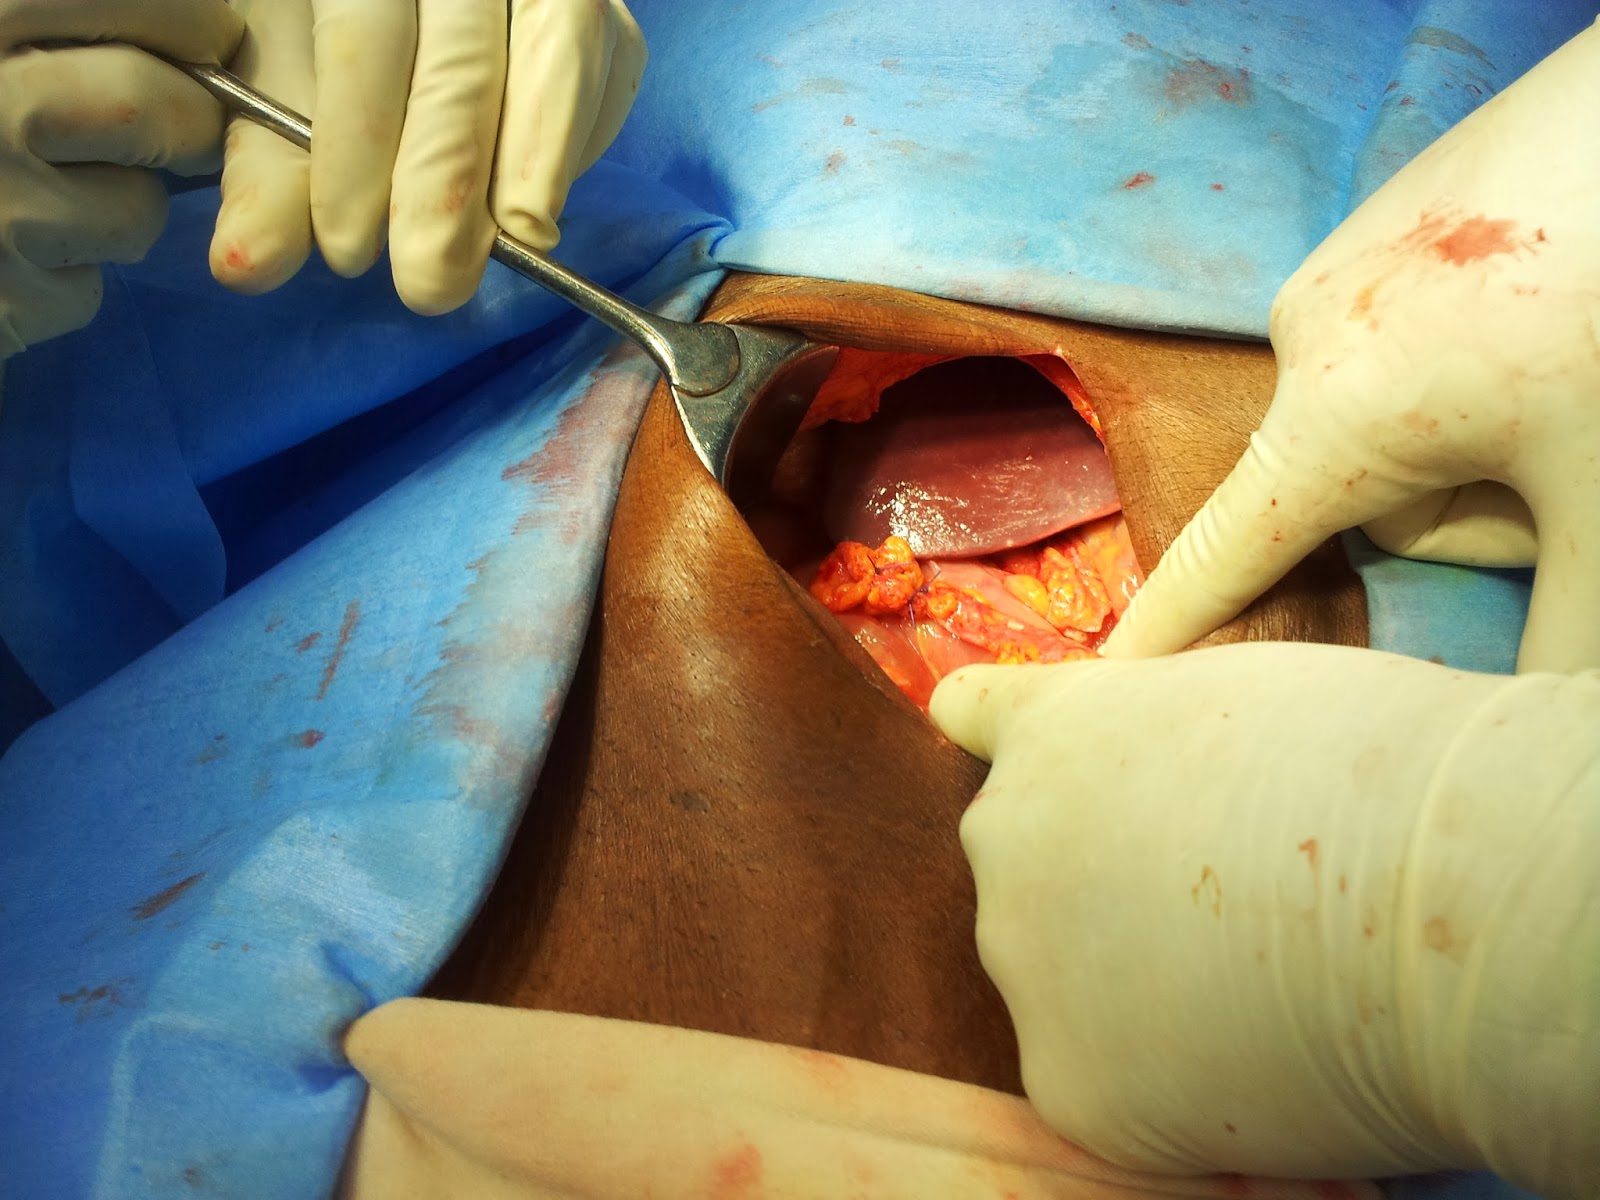 Patch Of Perforated Duodenal Ulcer